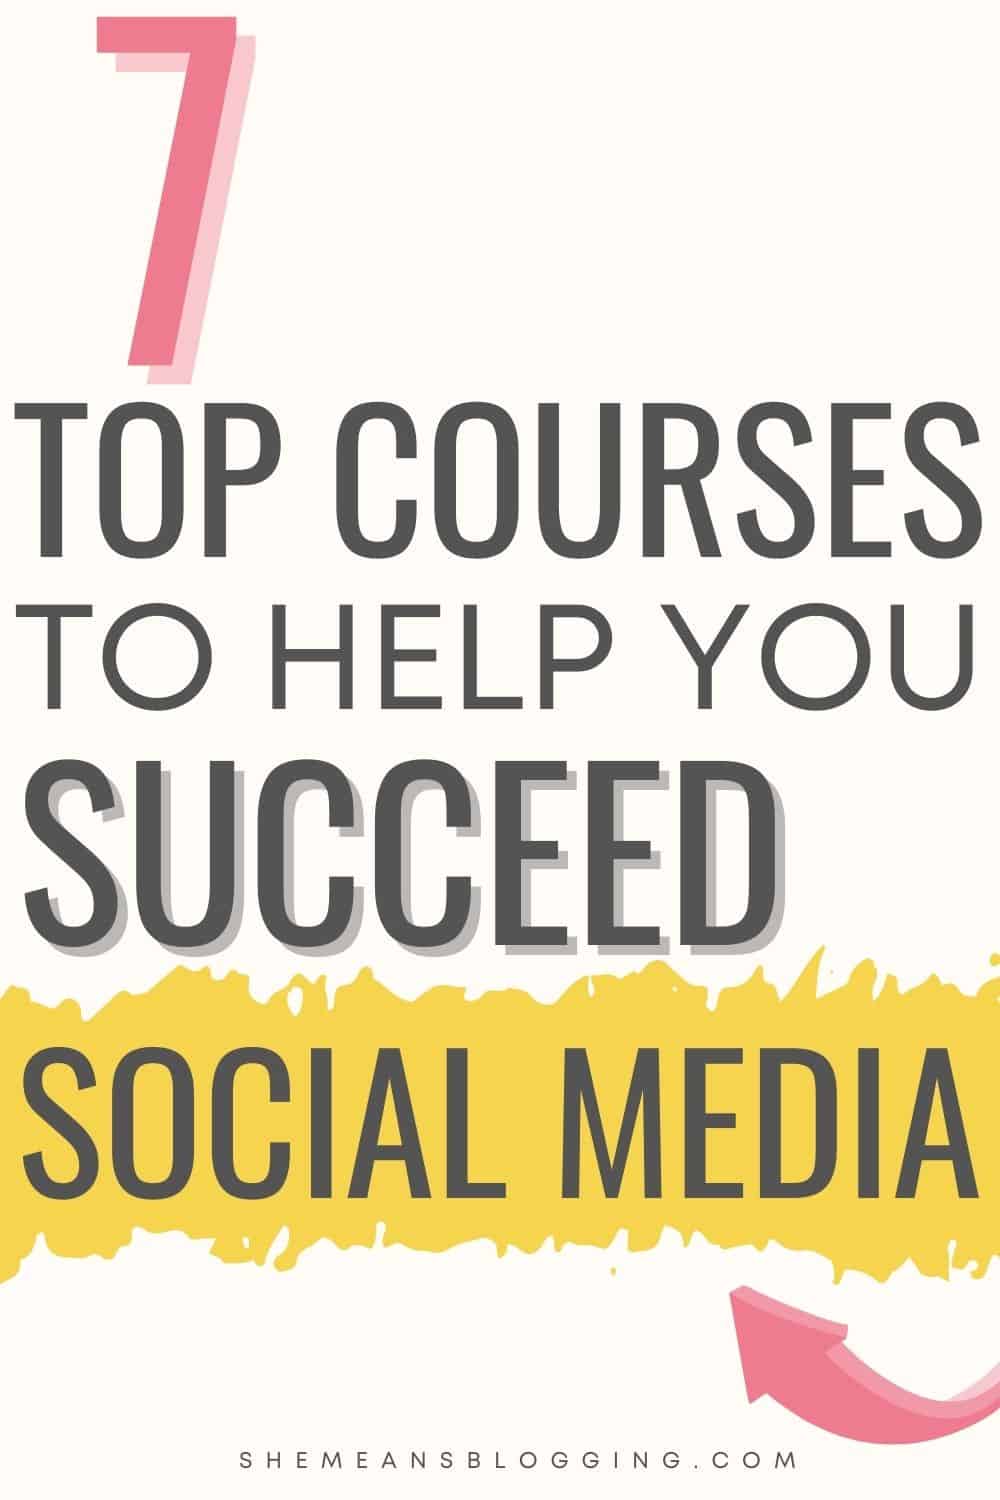 The best online courses for social media. From instagram strategy to youtube and personal branding, these popular social media courses will help become a successful marketer on social media platforms. Click to check out top social media online courses.